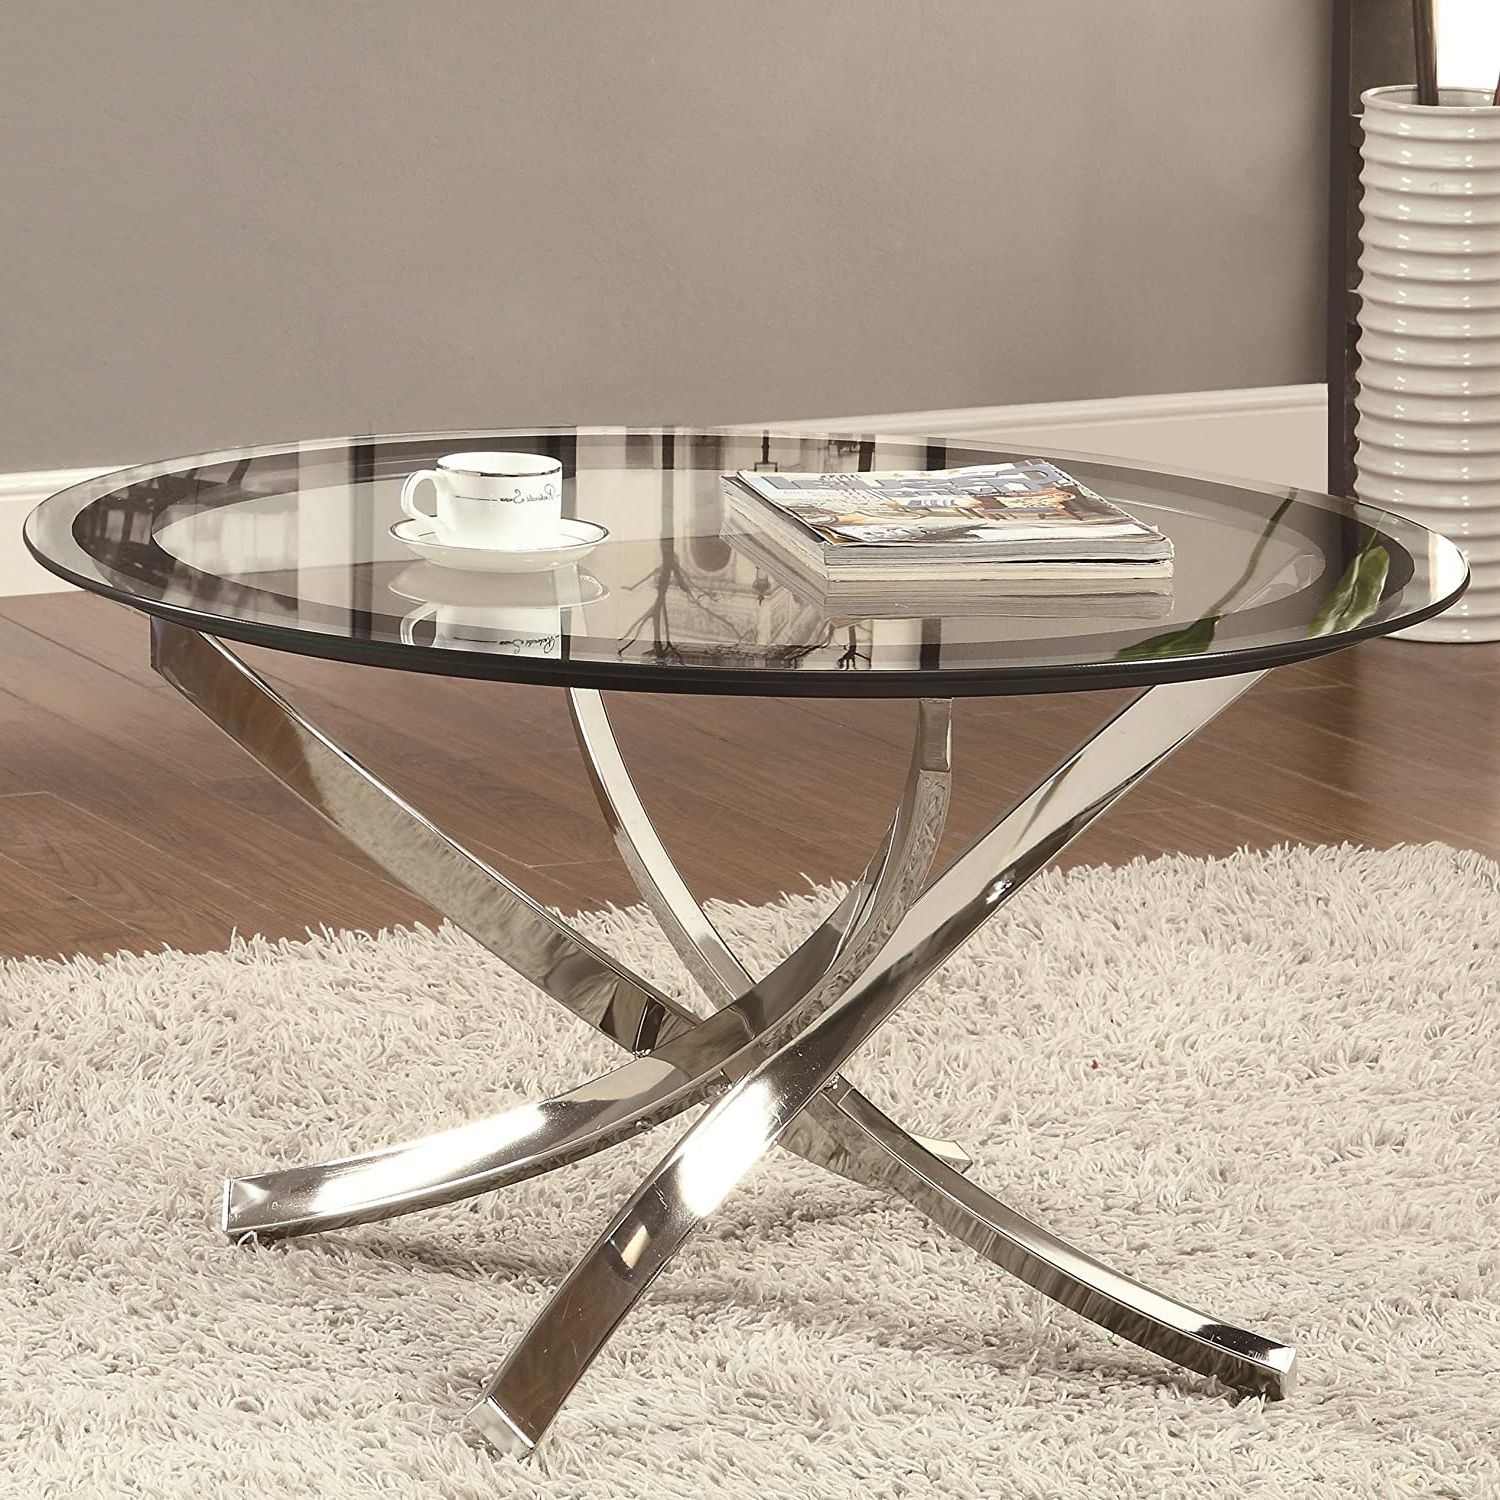 Contemporary Coffee Table Round Glass Modern Furniture Tables Cocktail In Most Up To Date Silver Mirror And Chrome Coffee Tables (View 5 of 10)